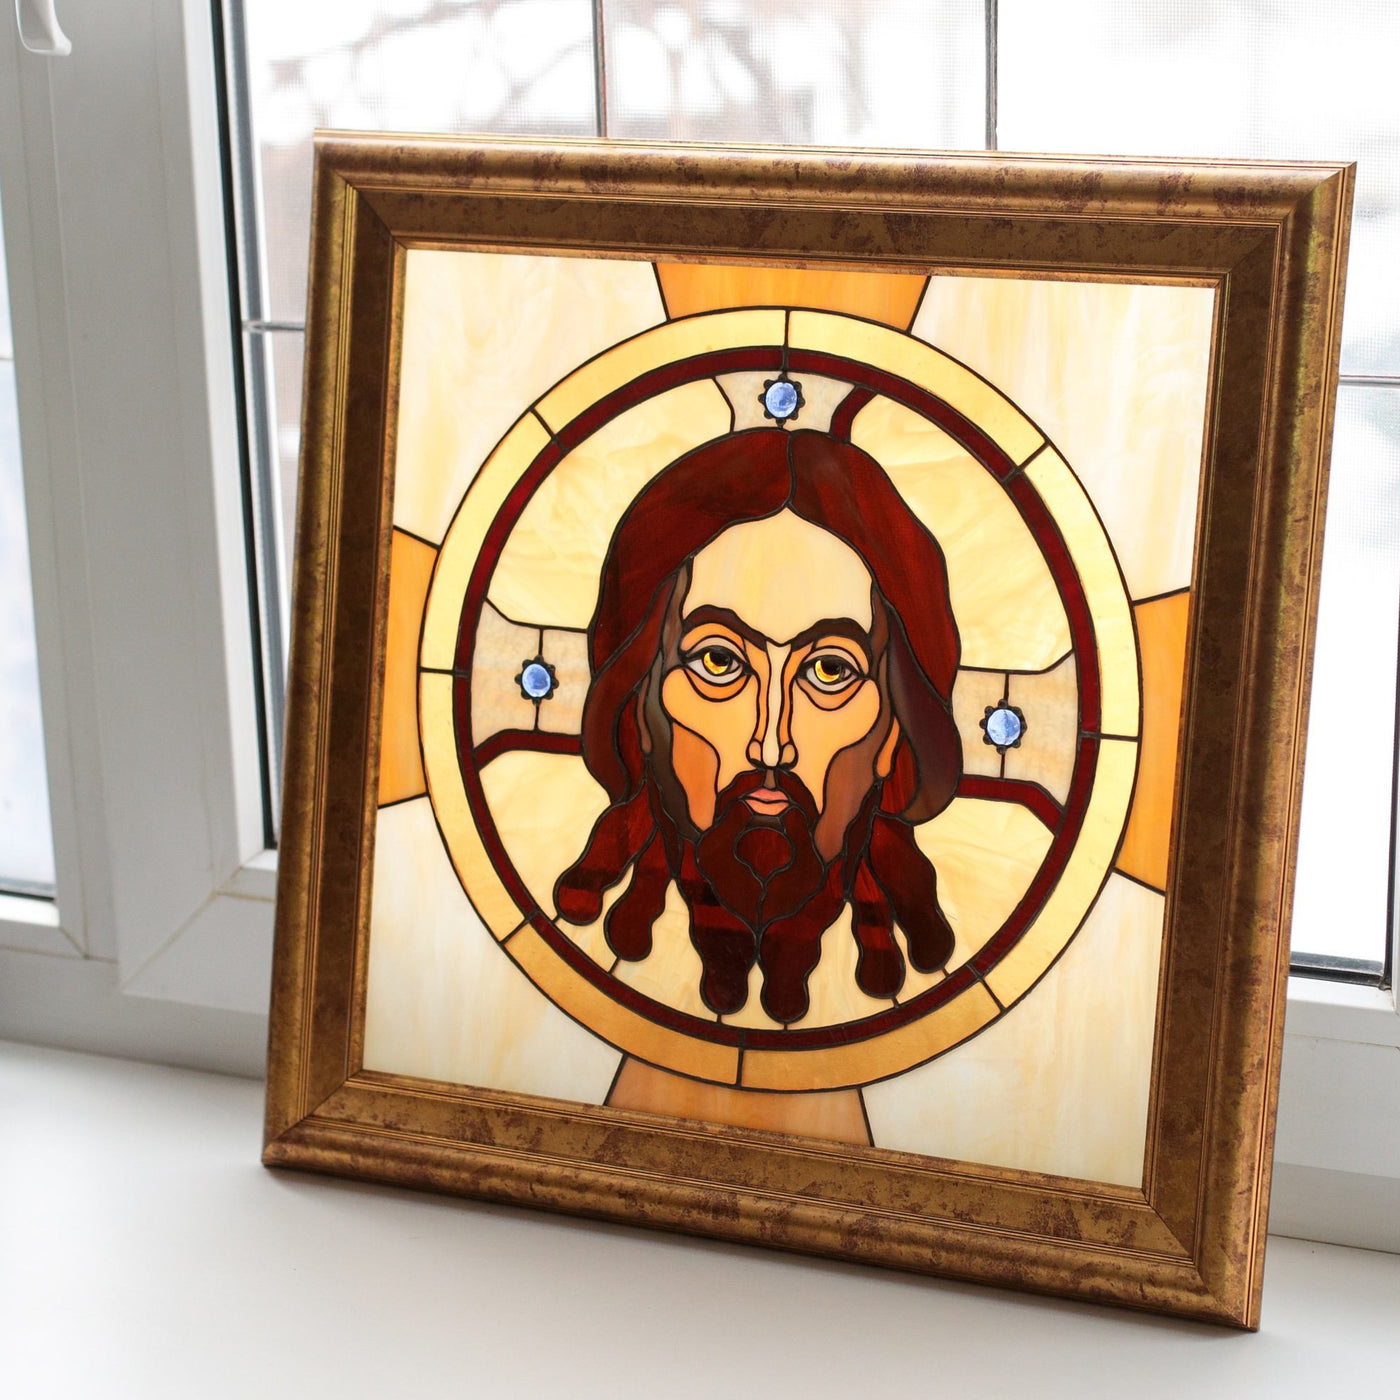 Stained glass panel depicting Jesus Christ panel with inserted gems